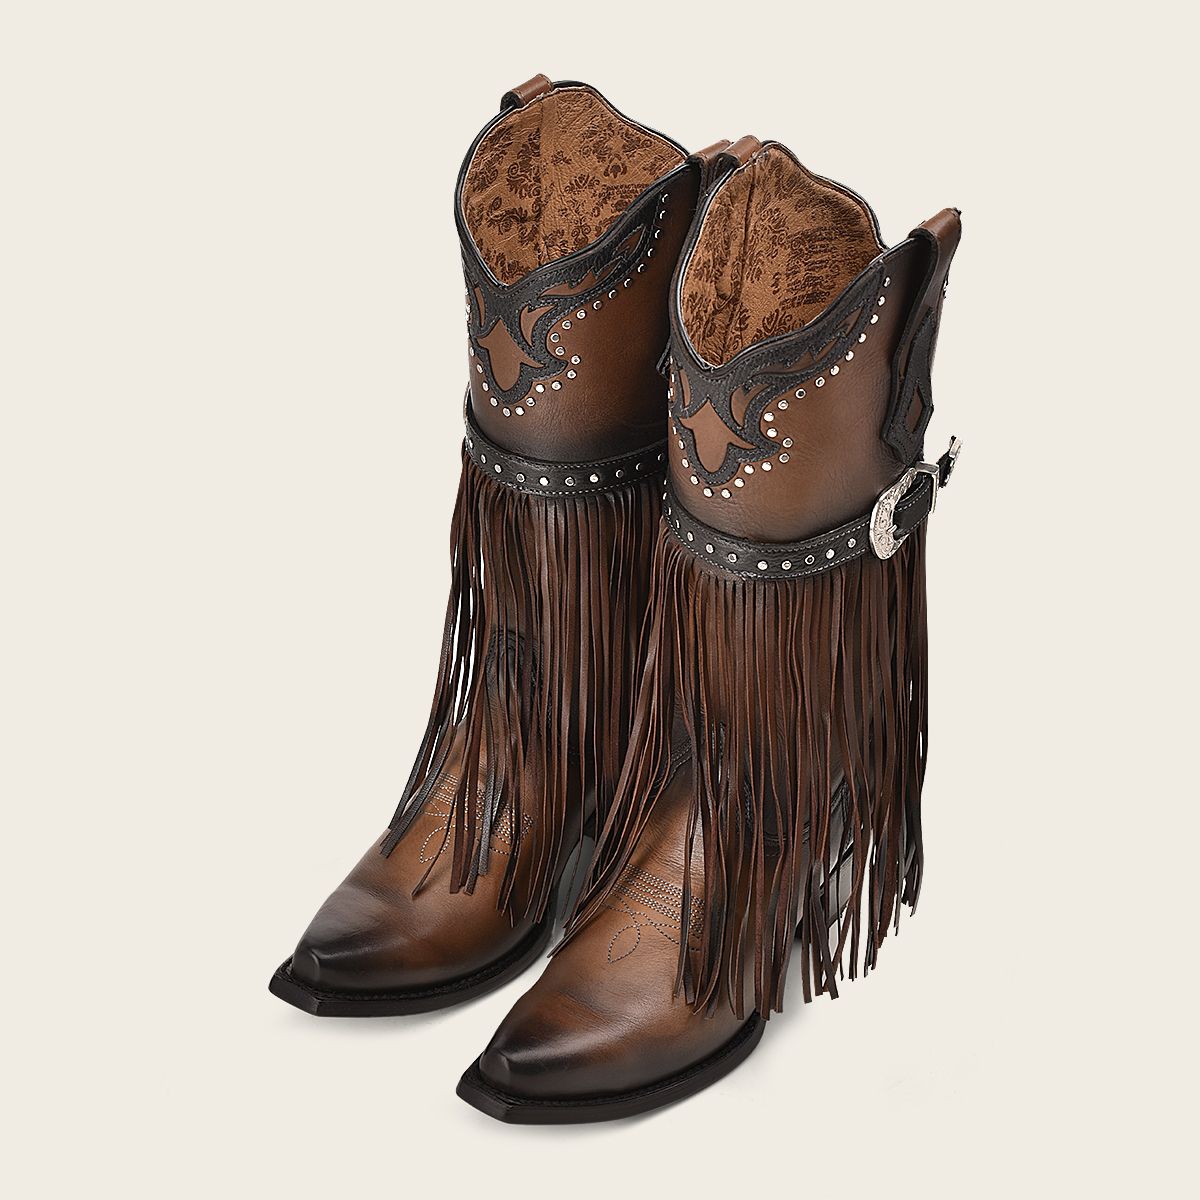 1GAXRS - Cuadra brown western cowgirl fringed leather boots for women-Kuet.us